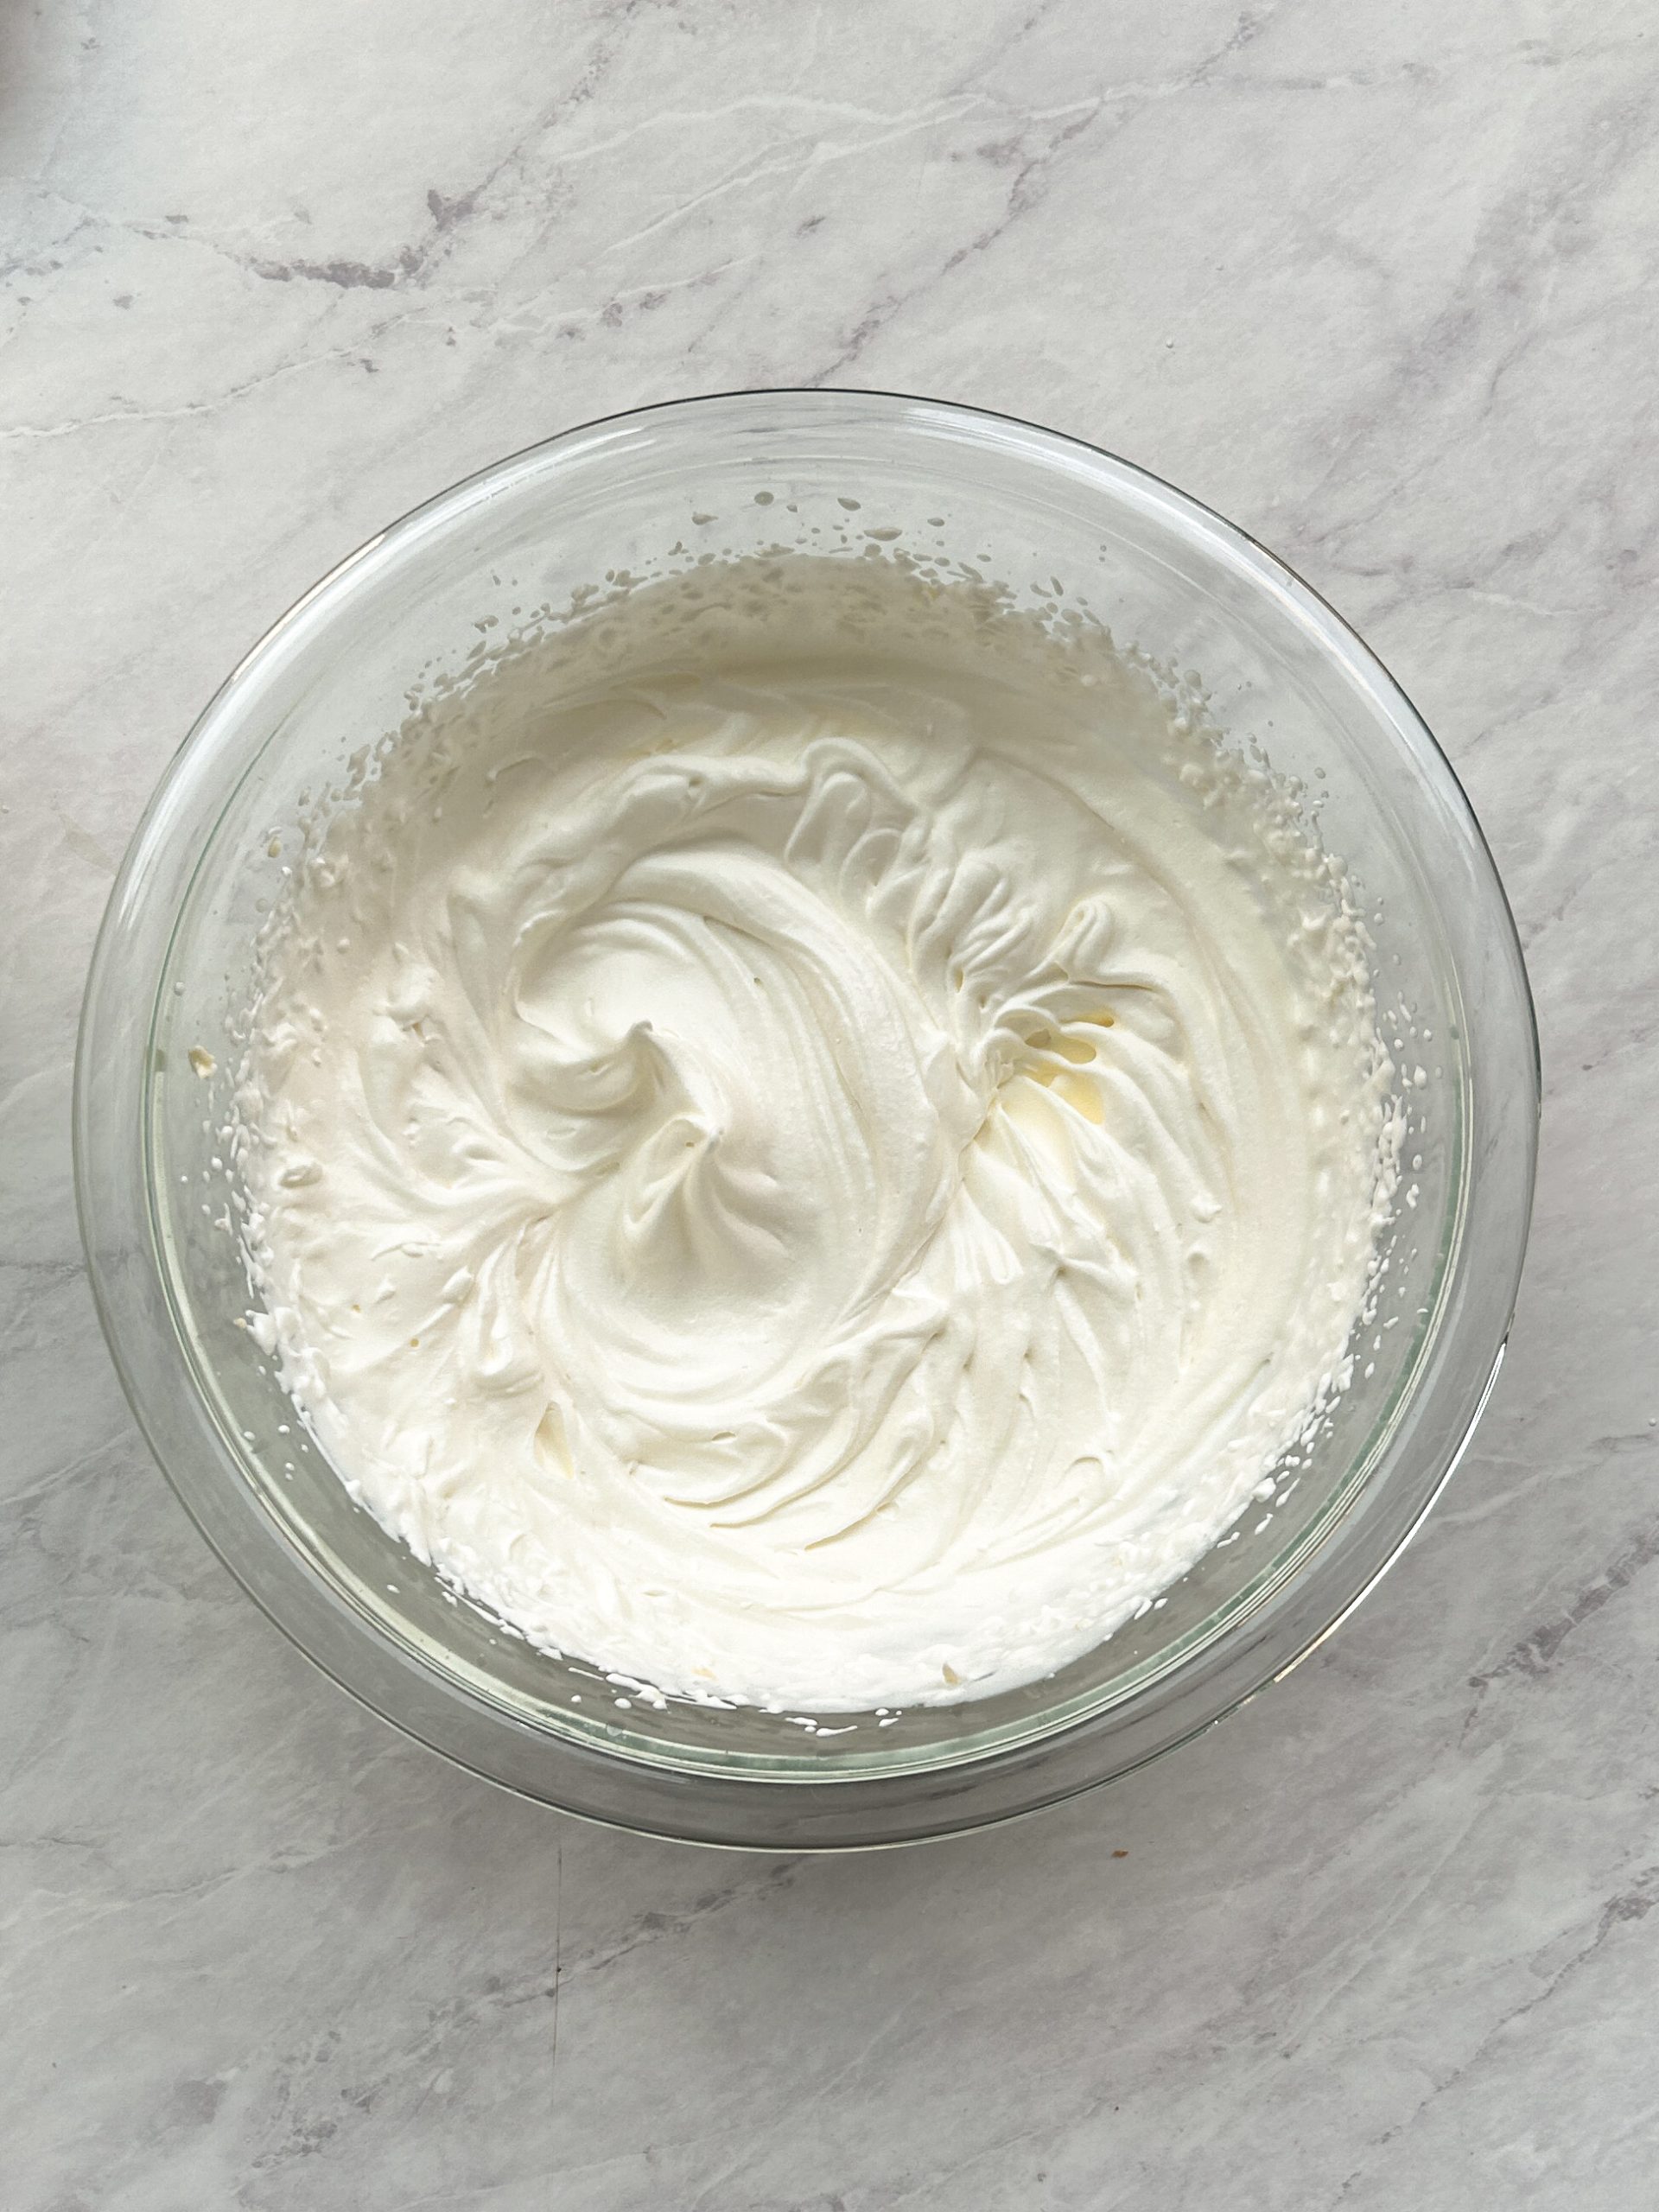 whipped cream in a glass bowl